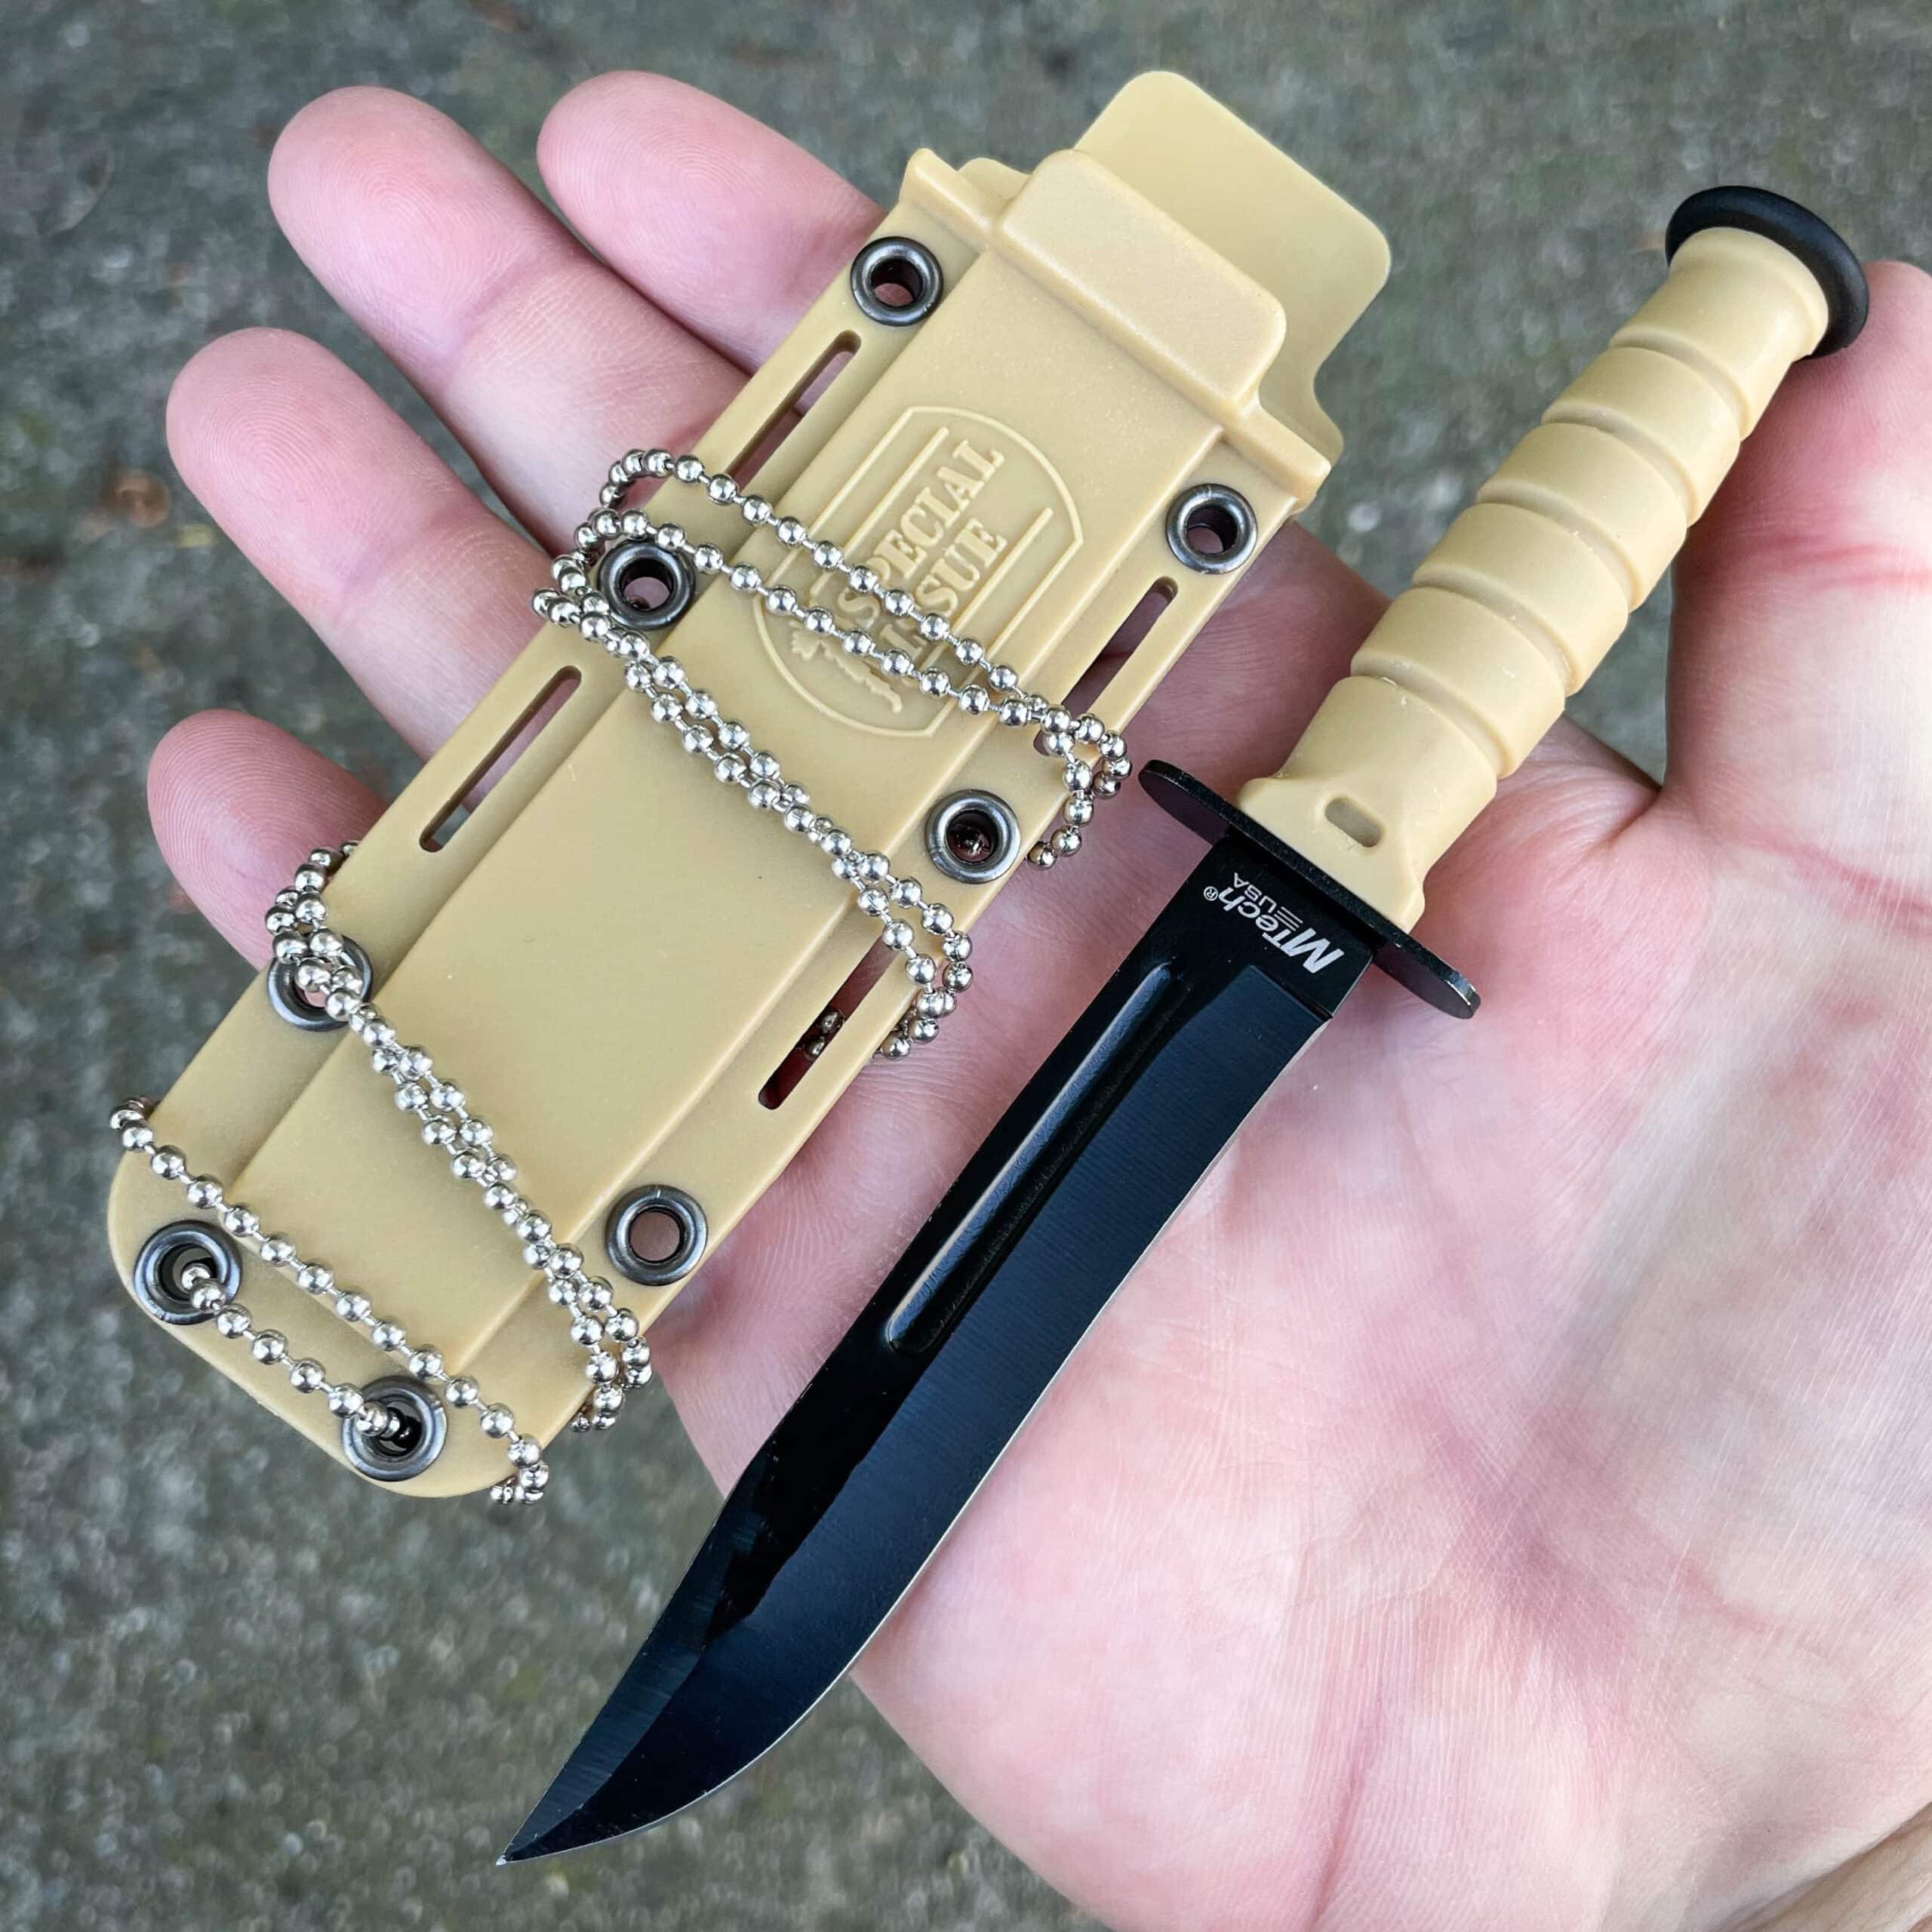 6" MTECH Military Kabai Tactical Fixed Blade Combat Neck Knife w/ Chained Sheath